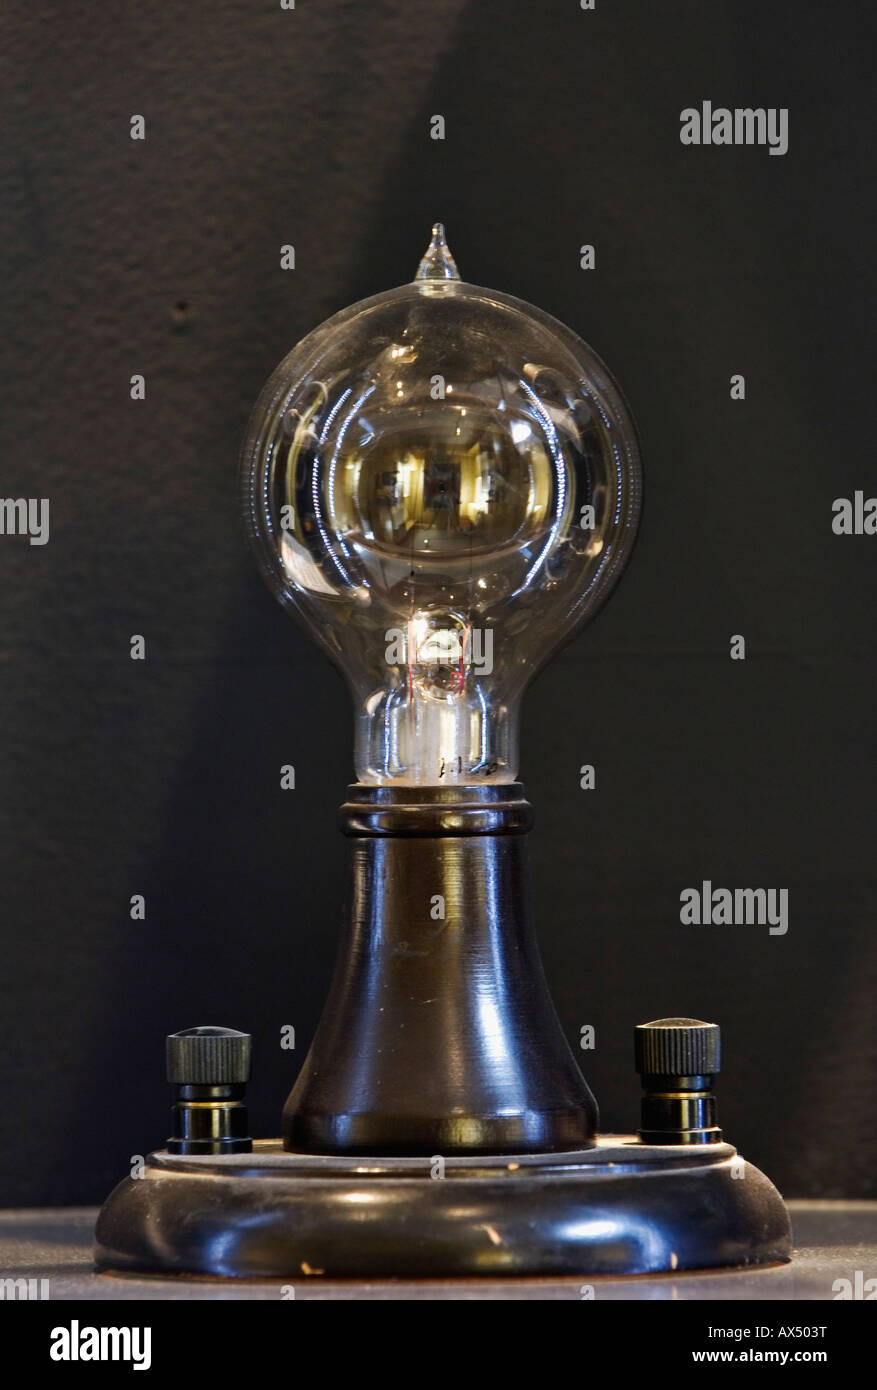 Replica of Thomas Edison's Original Incandescent Lamp which He Perfected and Lit on October 21 1879 Thomas Edison House Stock Photo